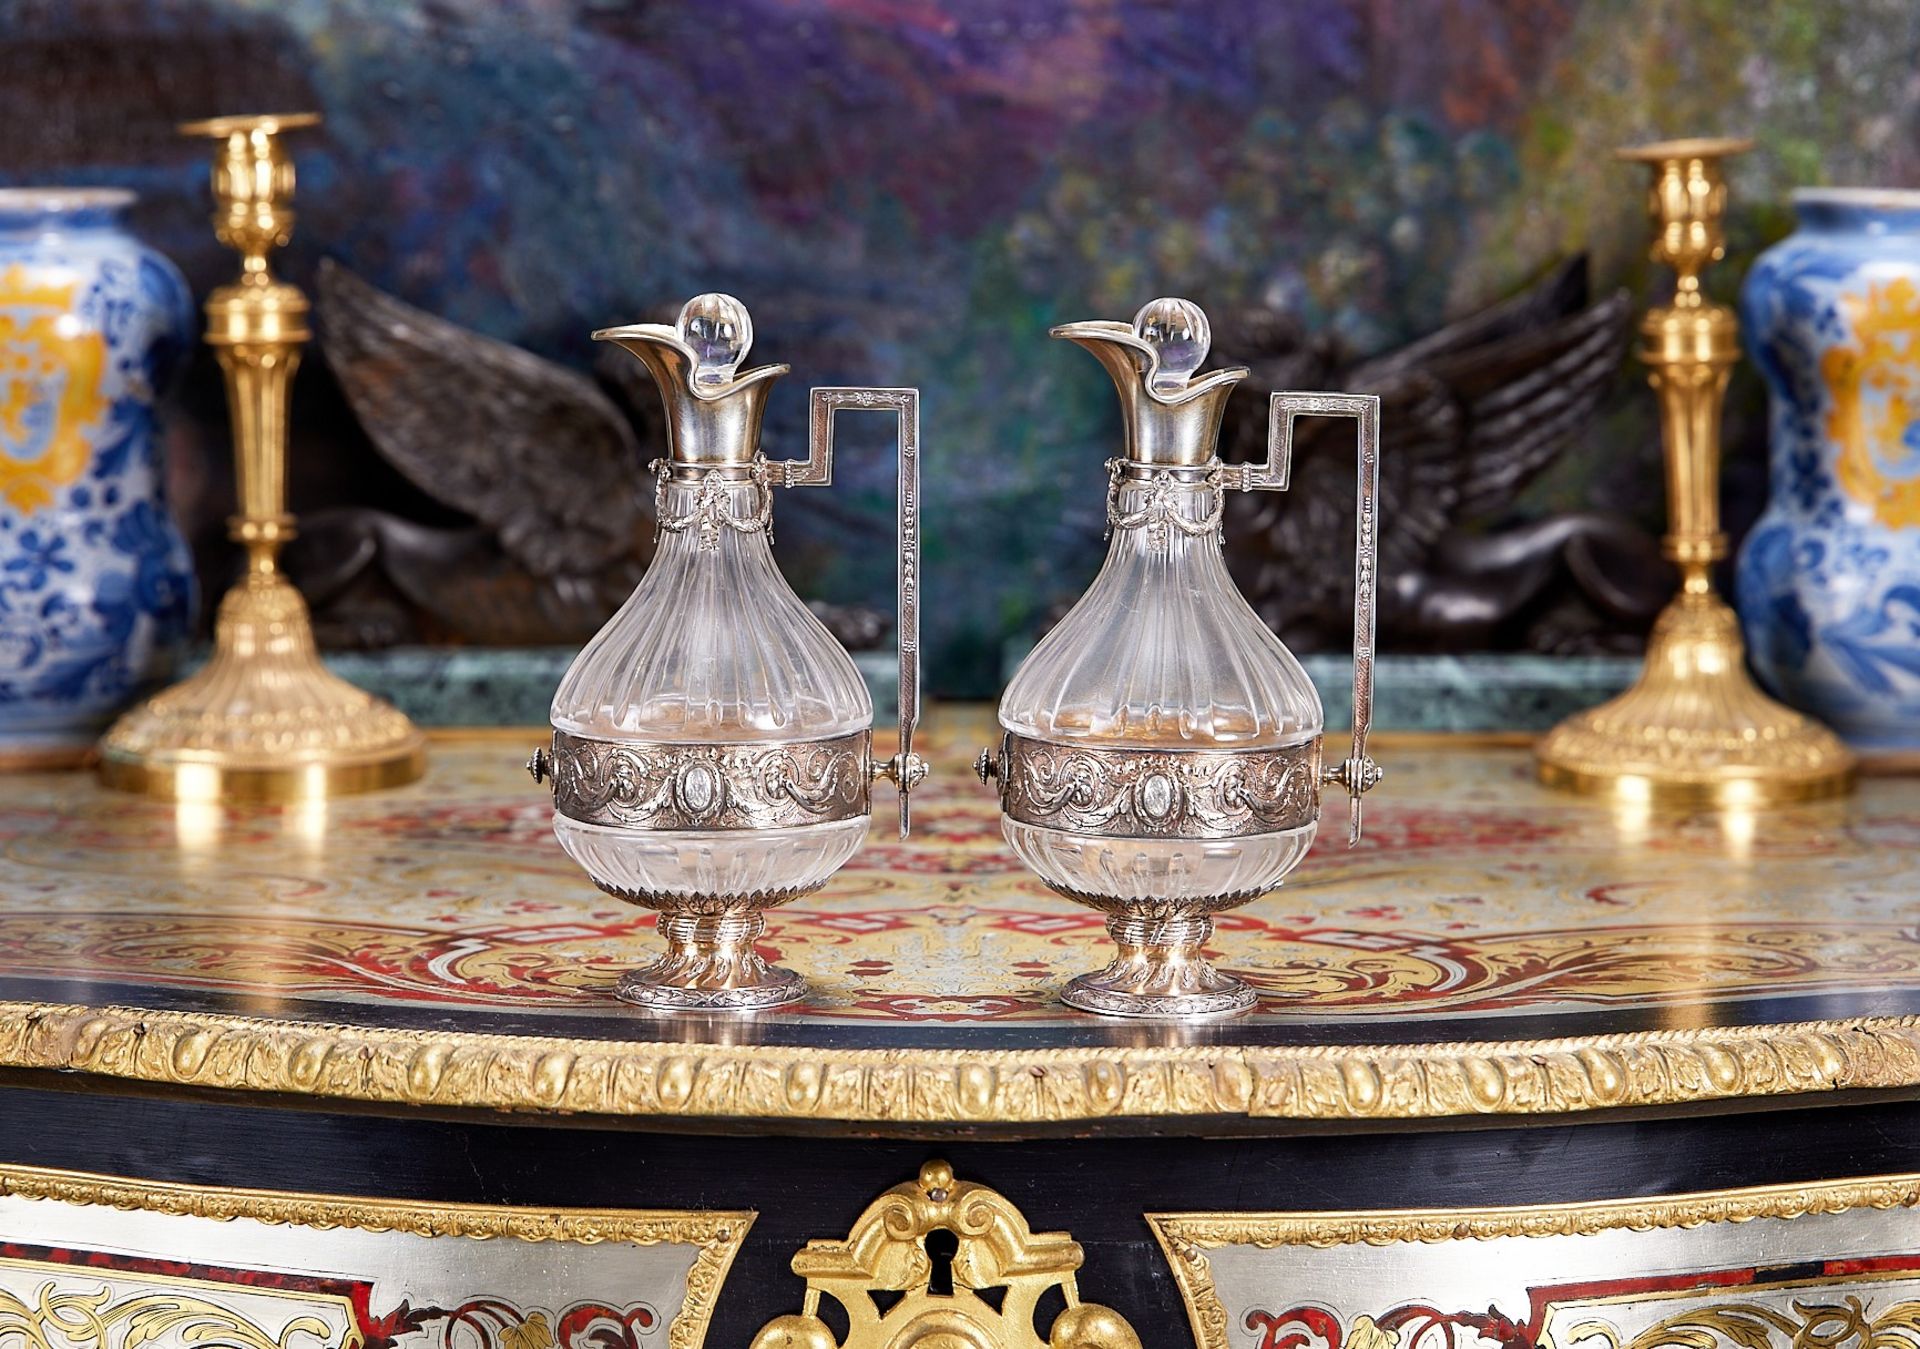 A PAIR OF 19TH CENTURY FRENCH SILVER AND GLASS LIQUOR JUGS